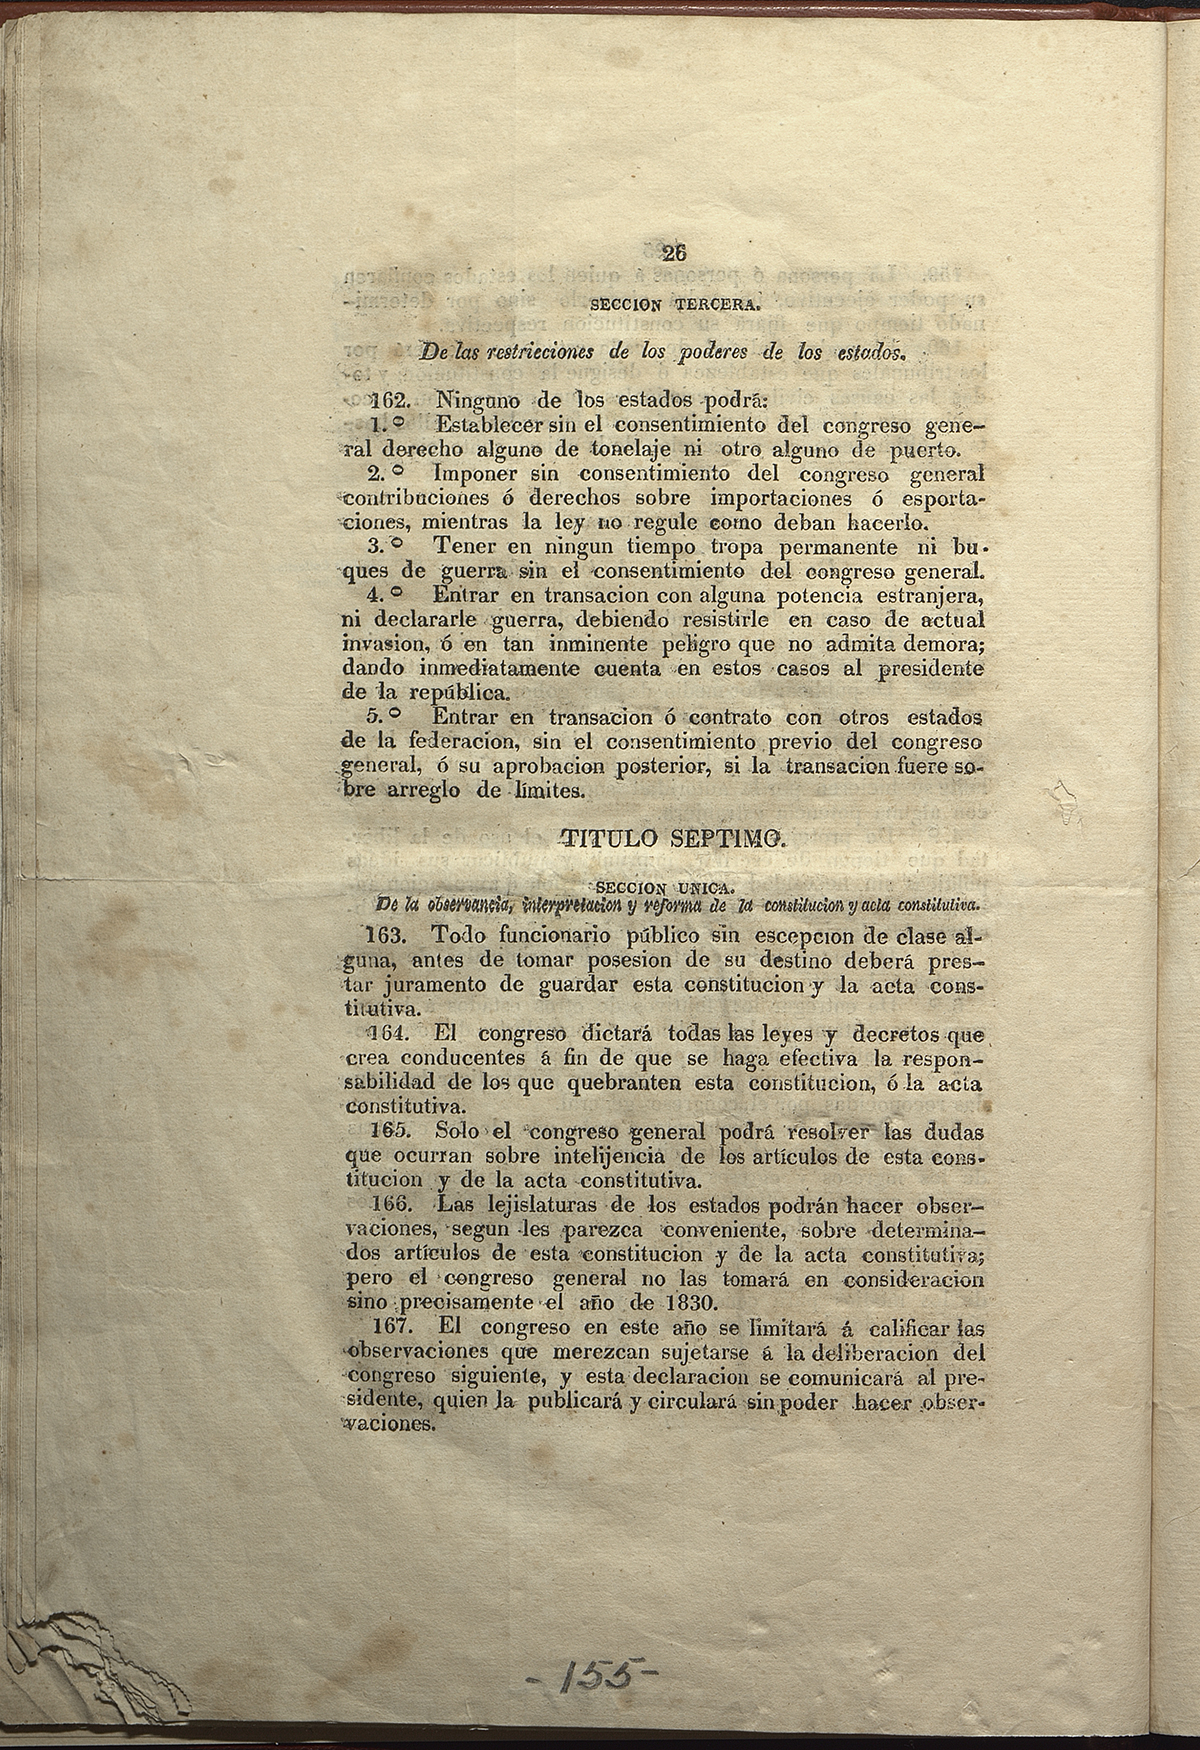 Title VII, Sole Section, Articles 163-167